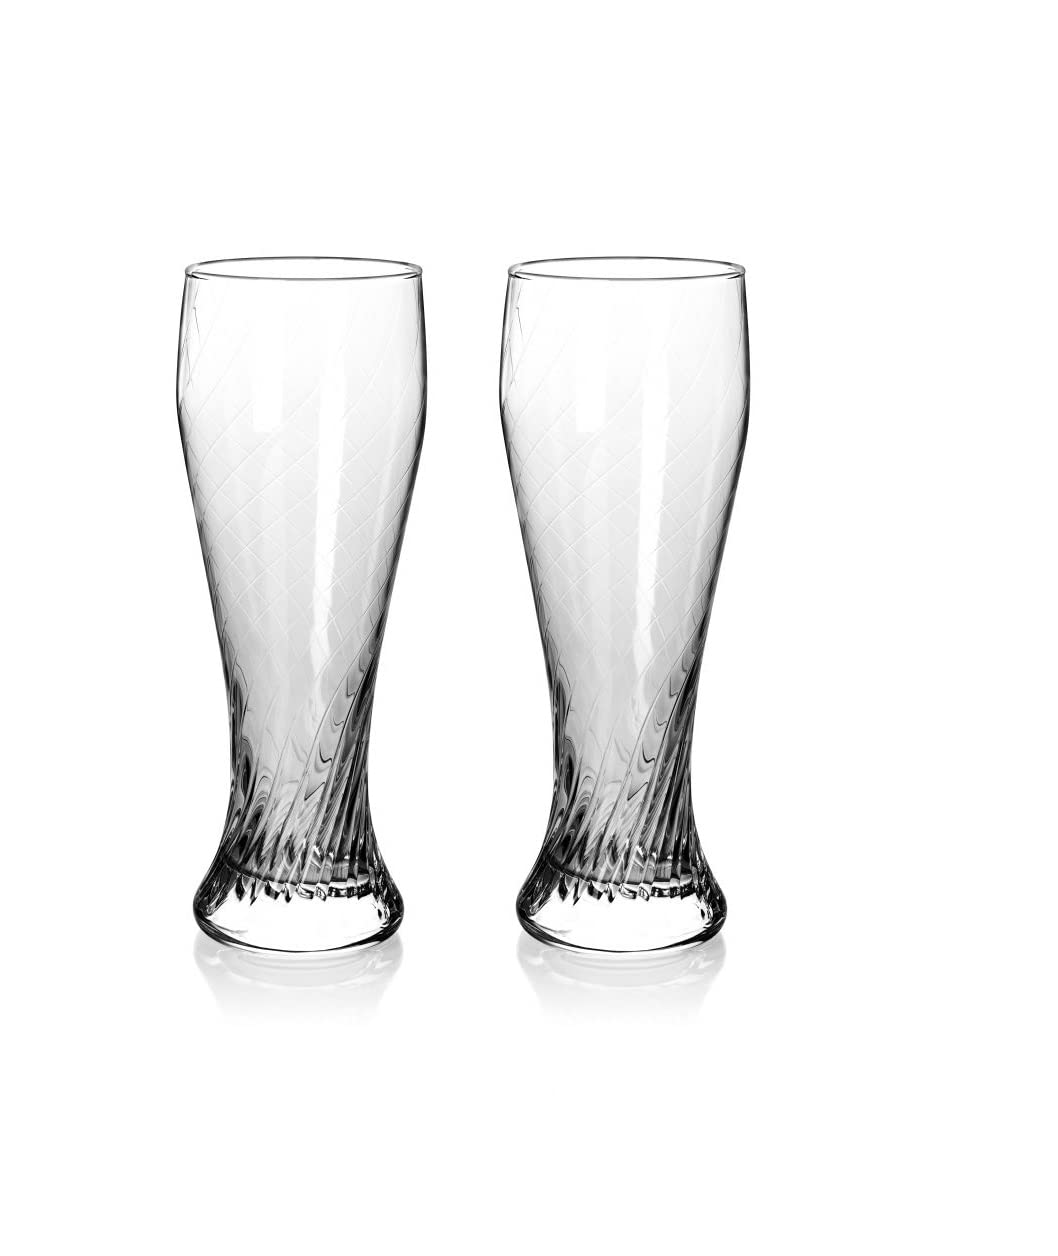 North Mountain Supply Cyclone Wheat Beer Glasses Review